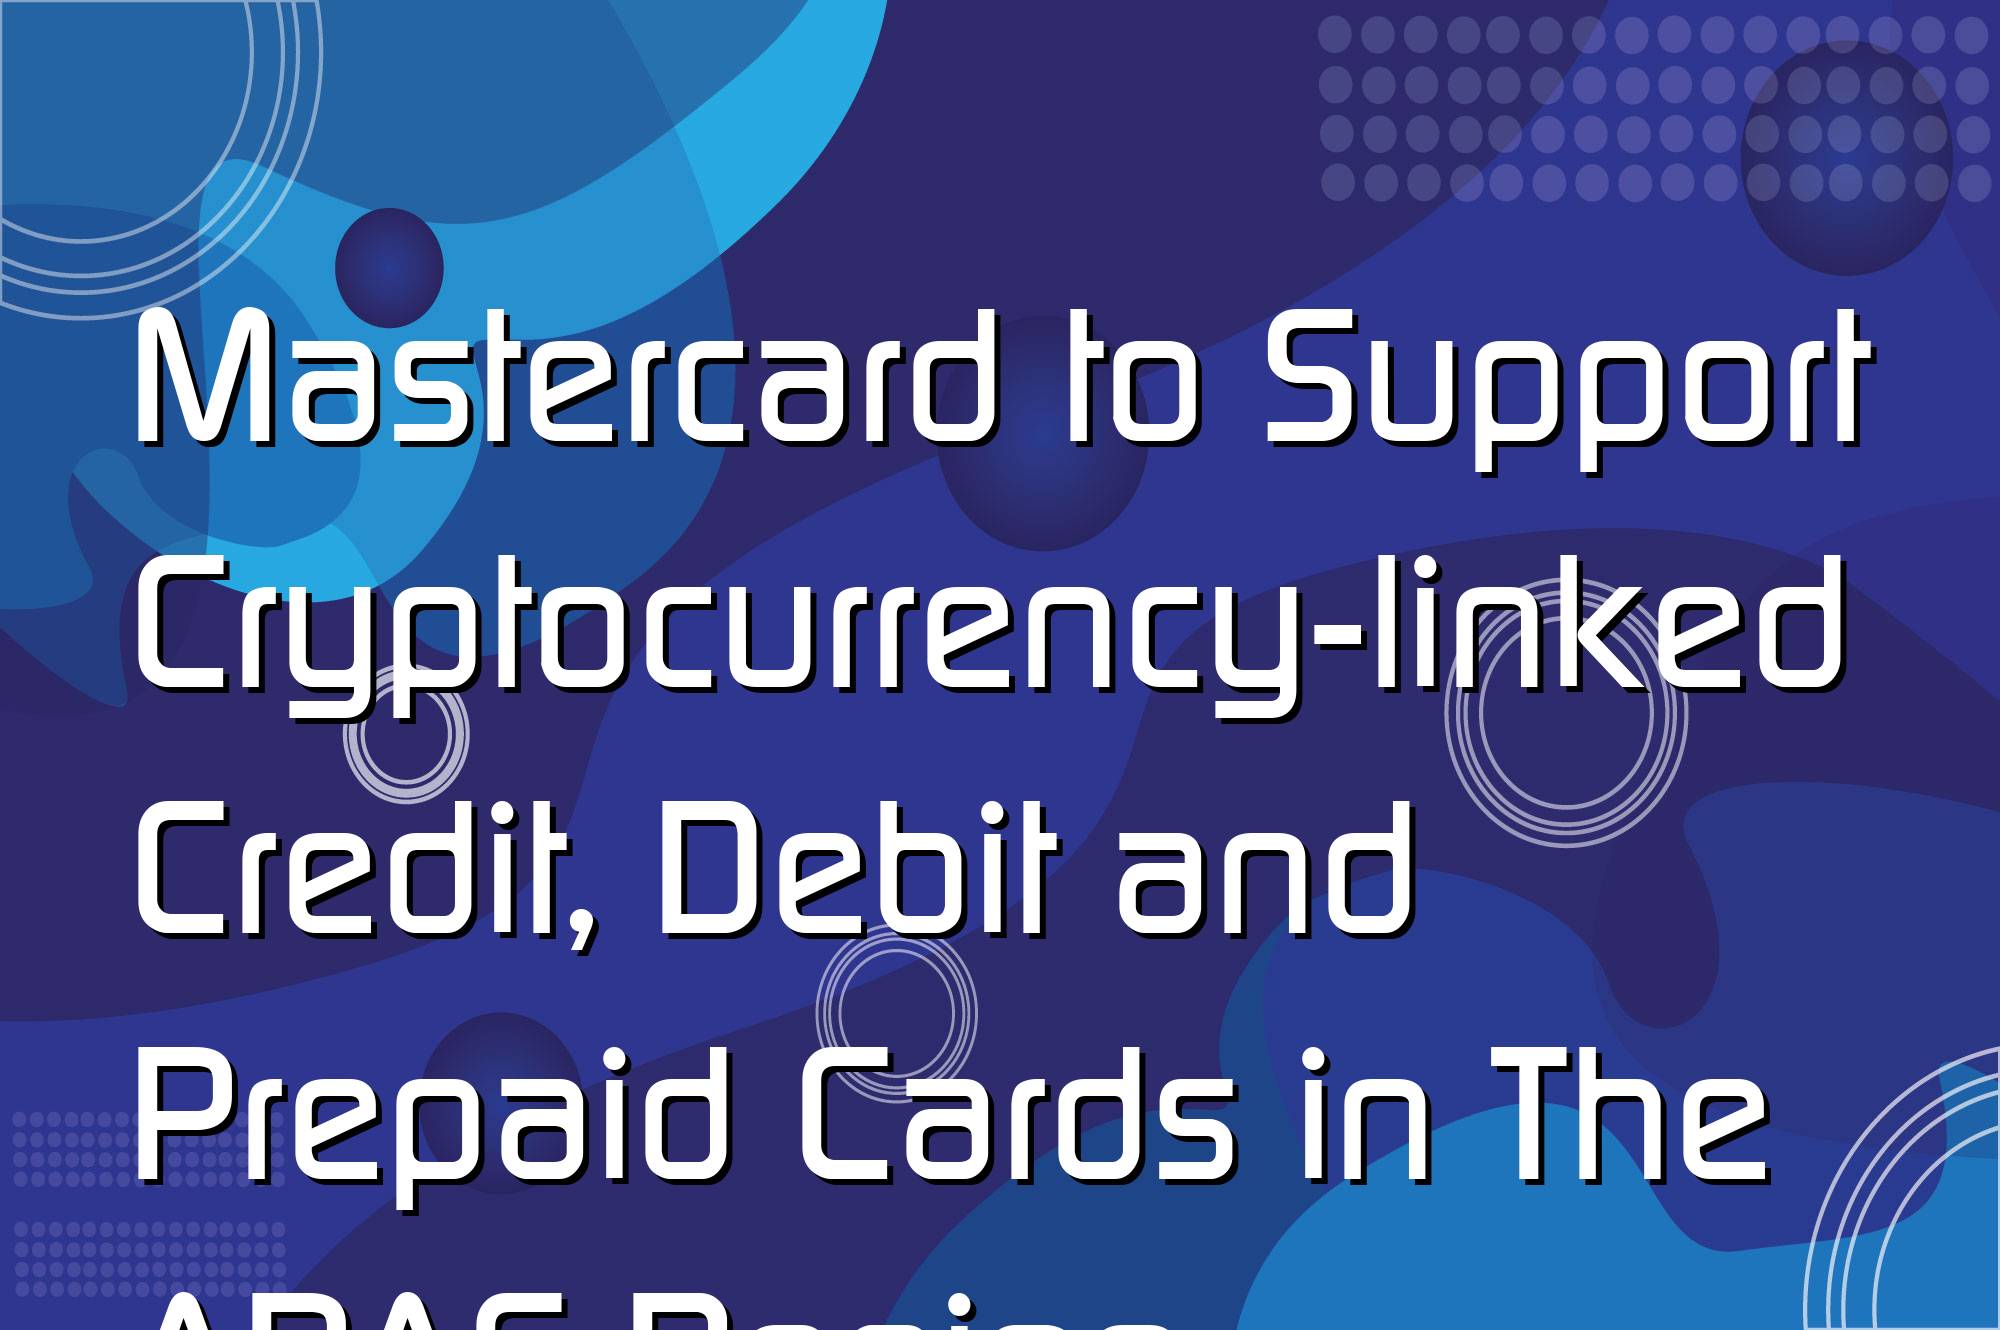 @$68287: Mastercard to Support Cryptocurrency-linked Credit, Debit and Prepaid Cards in The APAC Region